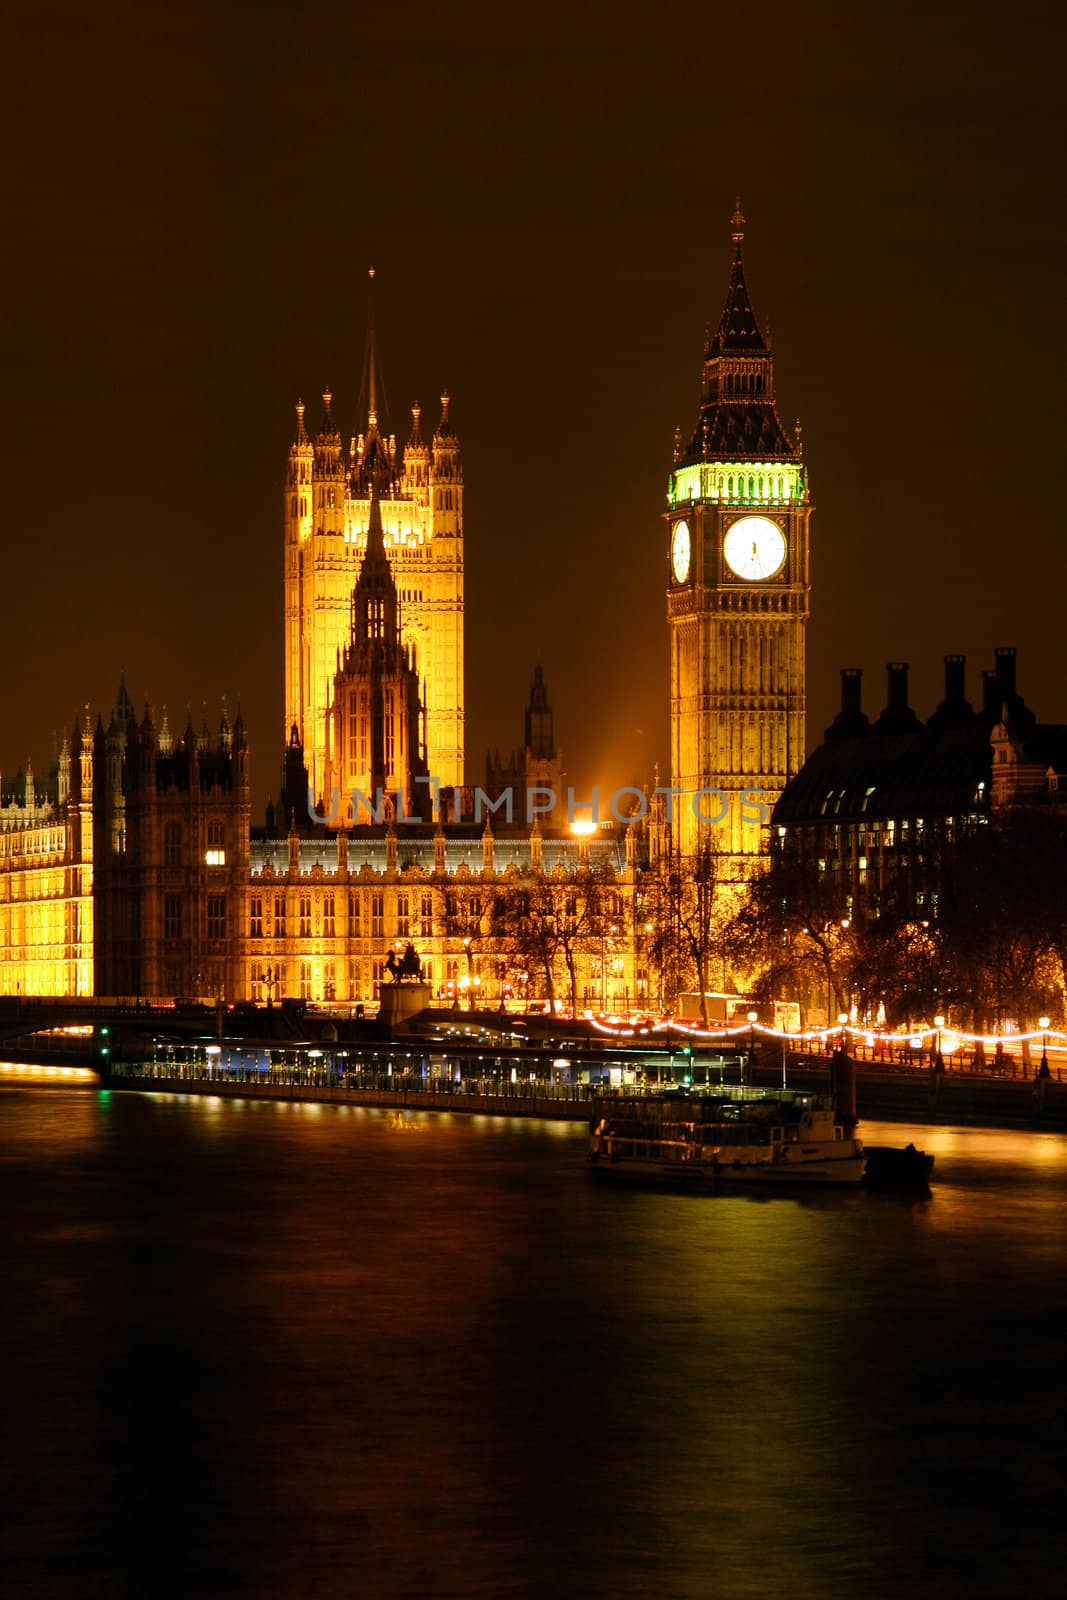 Night view of London with Big Ben and the Parliament house